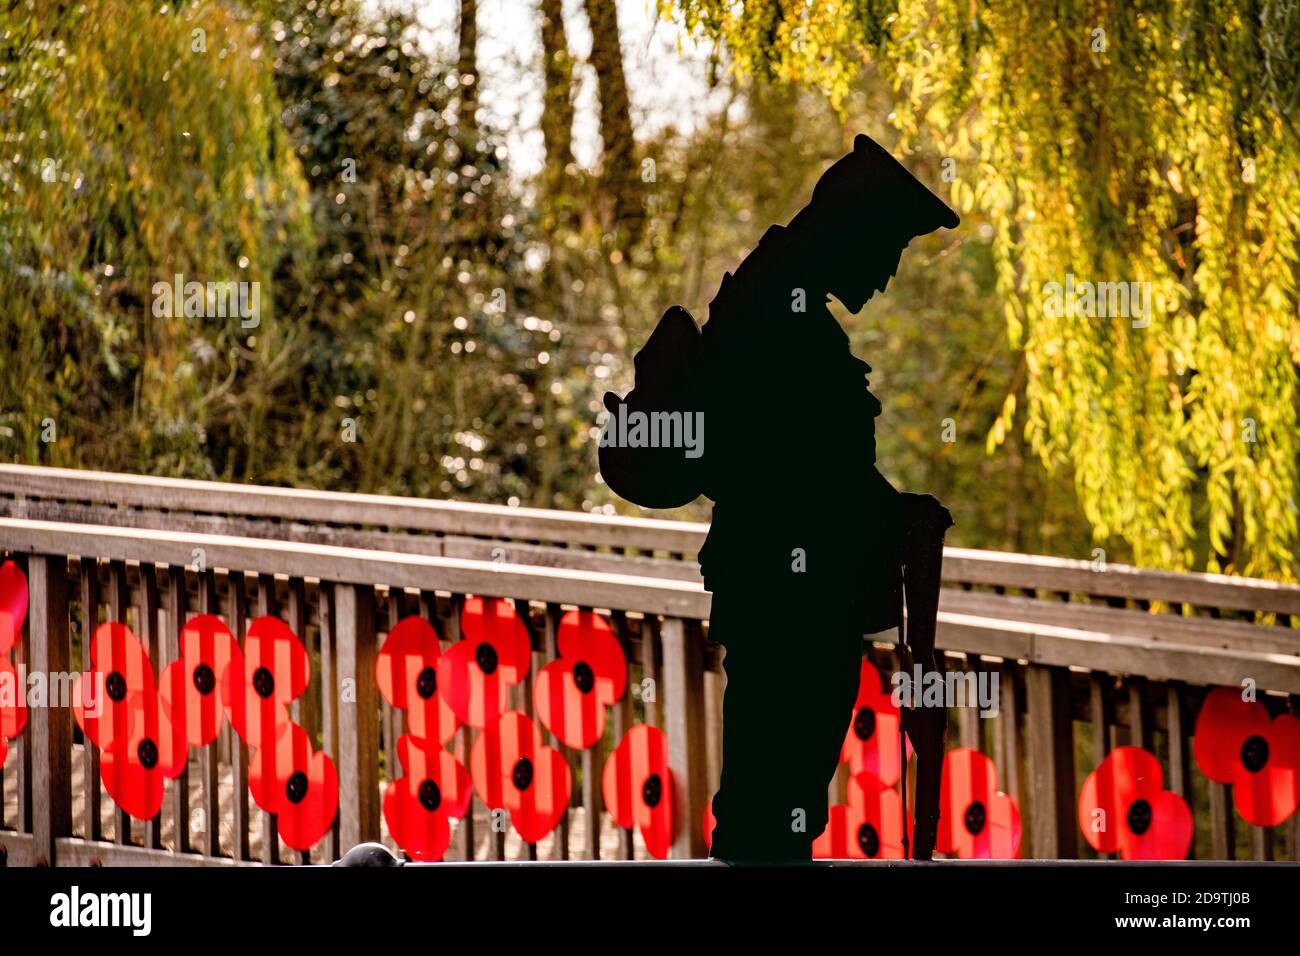 A cast iron silhouette of a soldier with head bowed and a footbridge covered in poppies over the River Mole in Brockham, Surrey for remembrance day Stock Photo